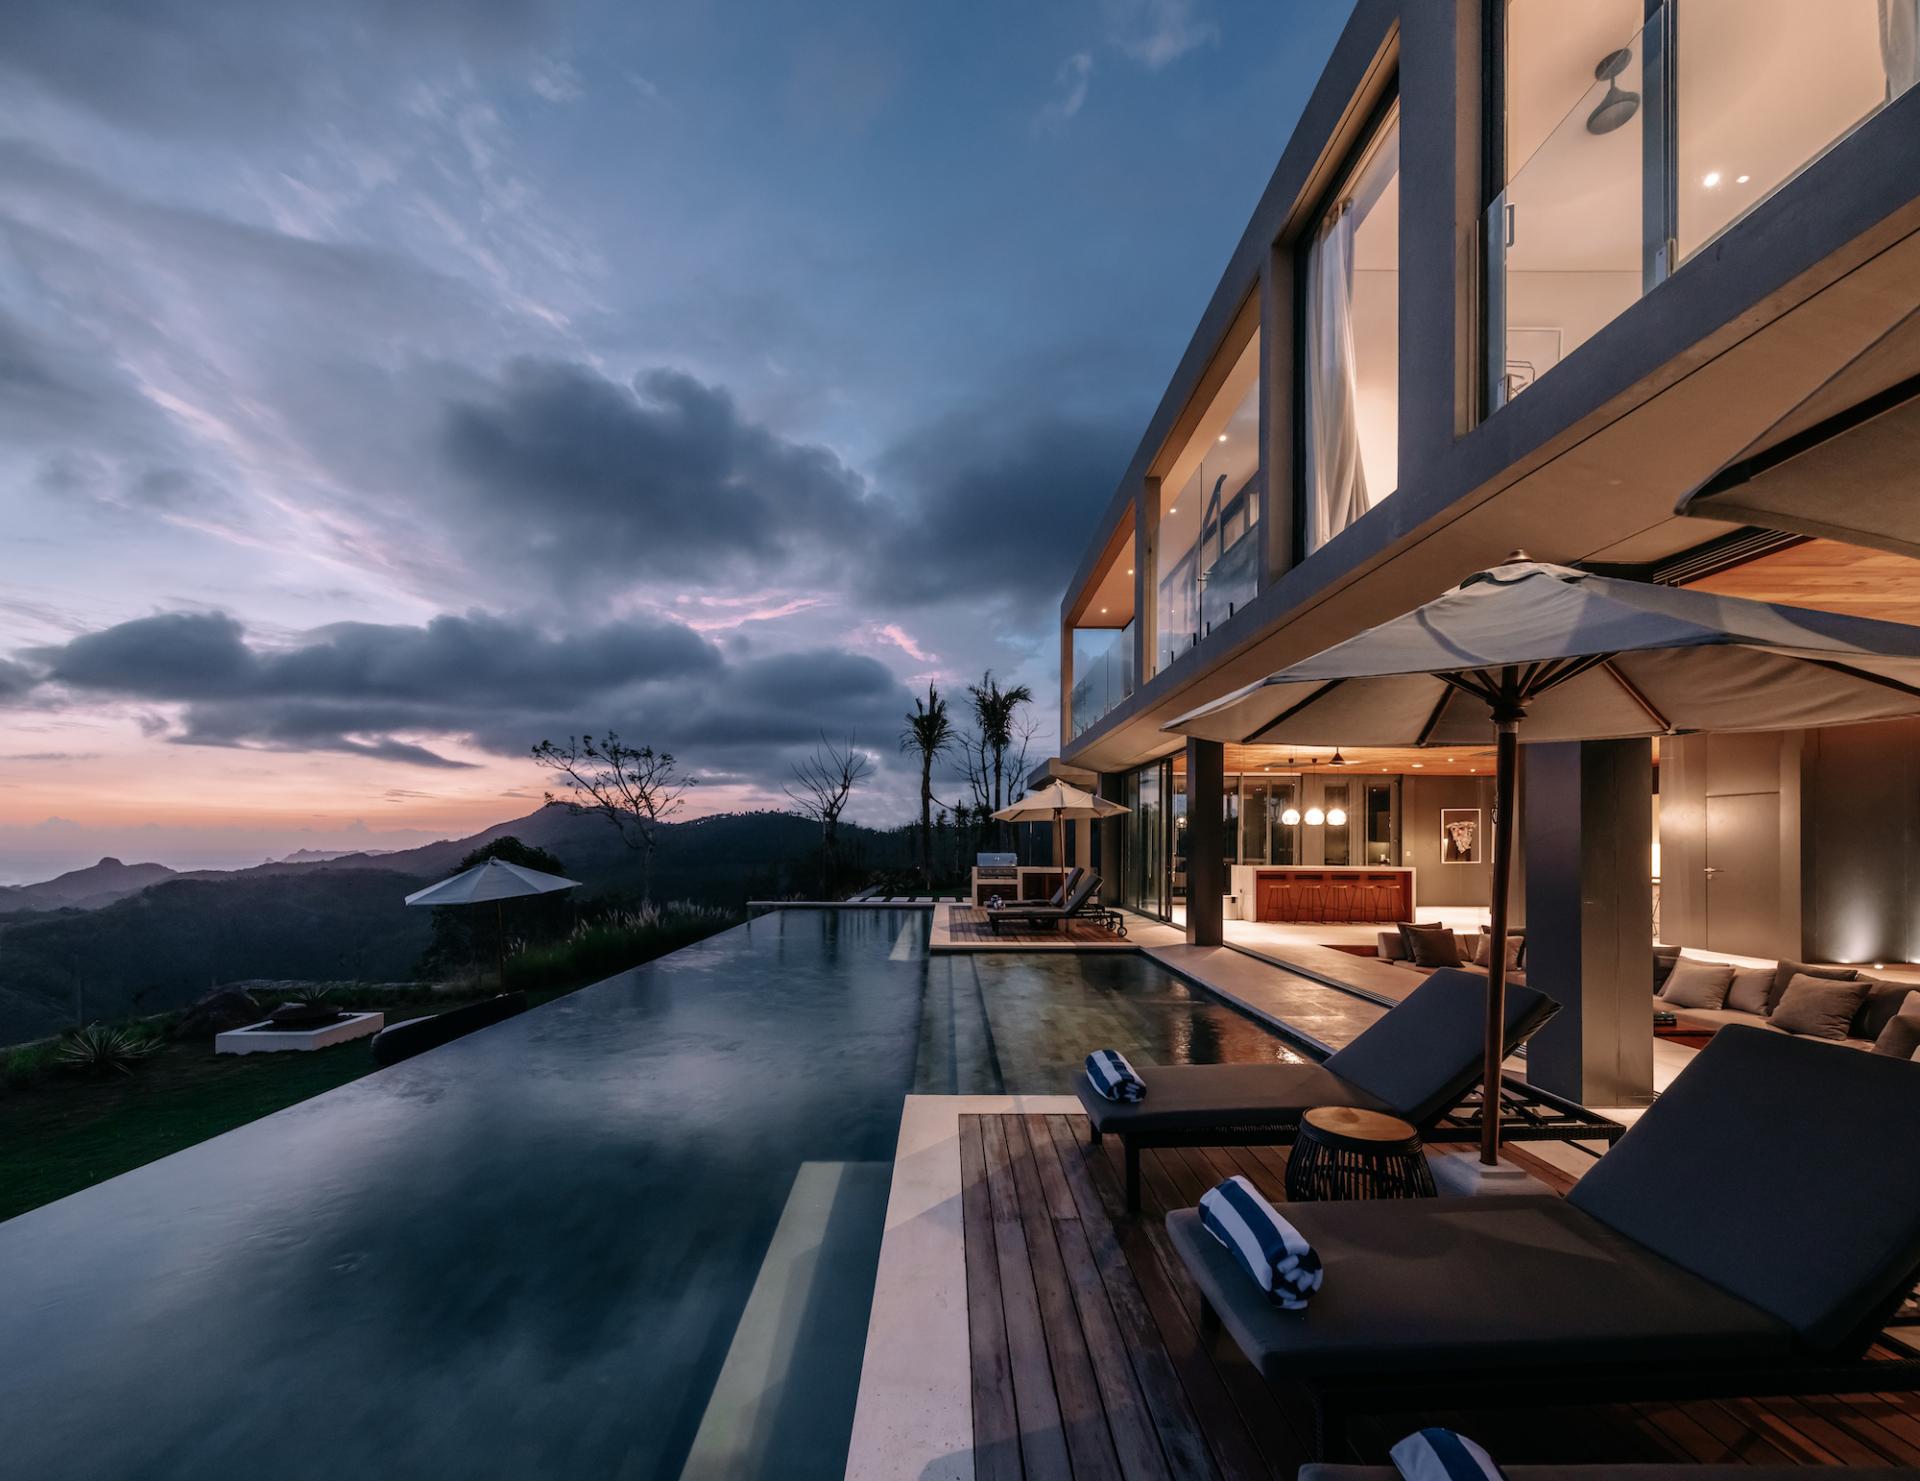 ALT-254 Conceives A Luxury Getaway In Indonesia That Blurs The Lines Between Indoors And Outdoors 